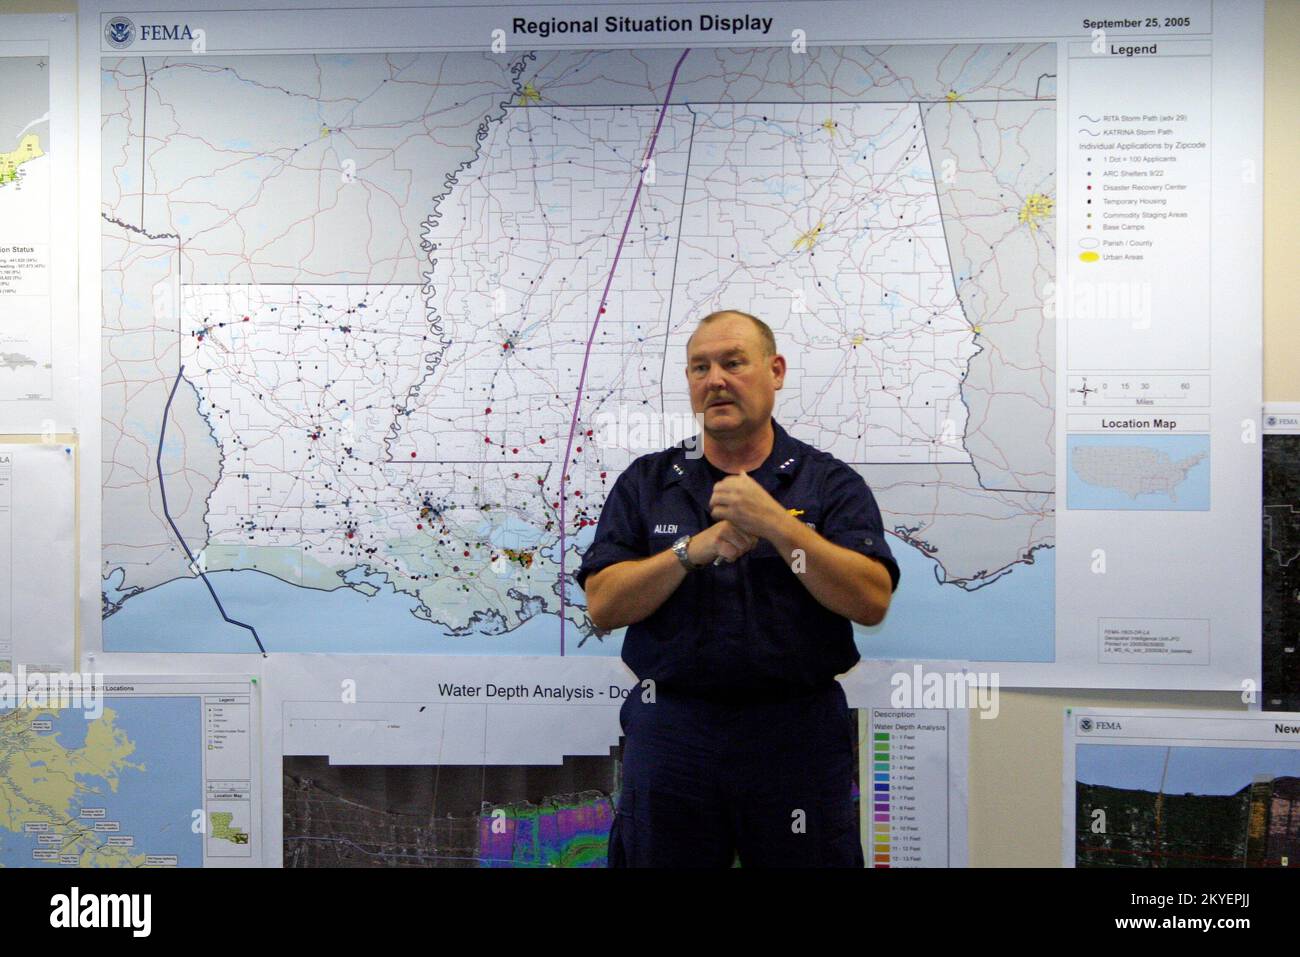 Hurricane Katrina, Baton Rouge, LA October 4, 2005 - USCG Vice Admiral Thad Allen, FEMA Principle Federal Official for the Gulf Coast, gave a situation report to members of Congress at the Joint Field Office. Stock Photo